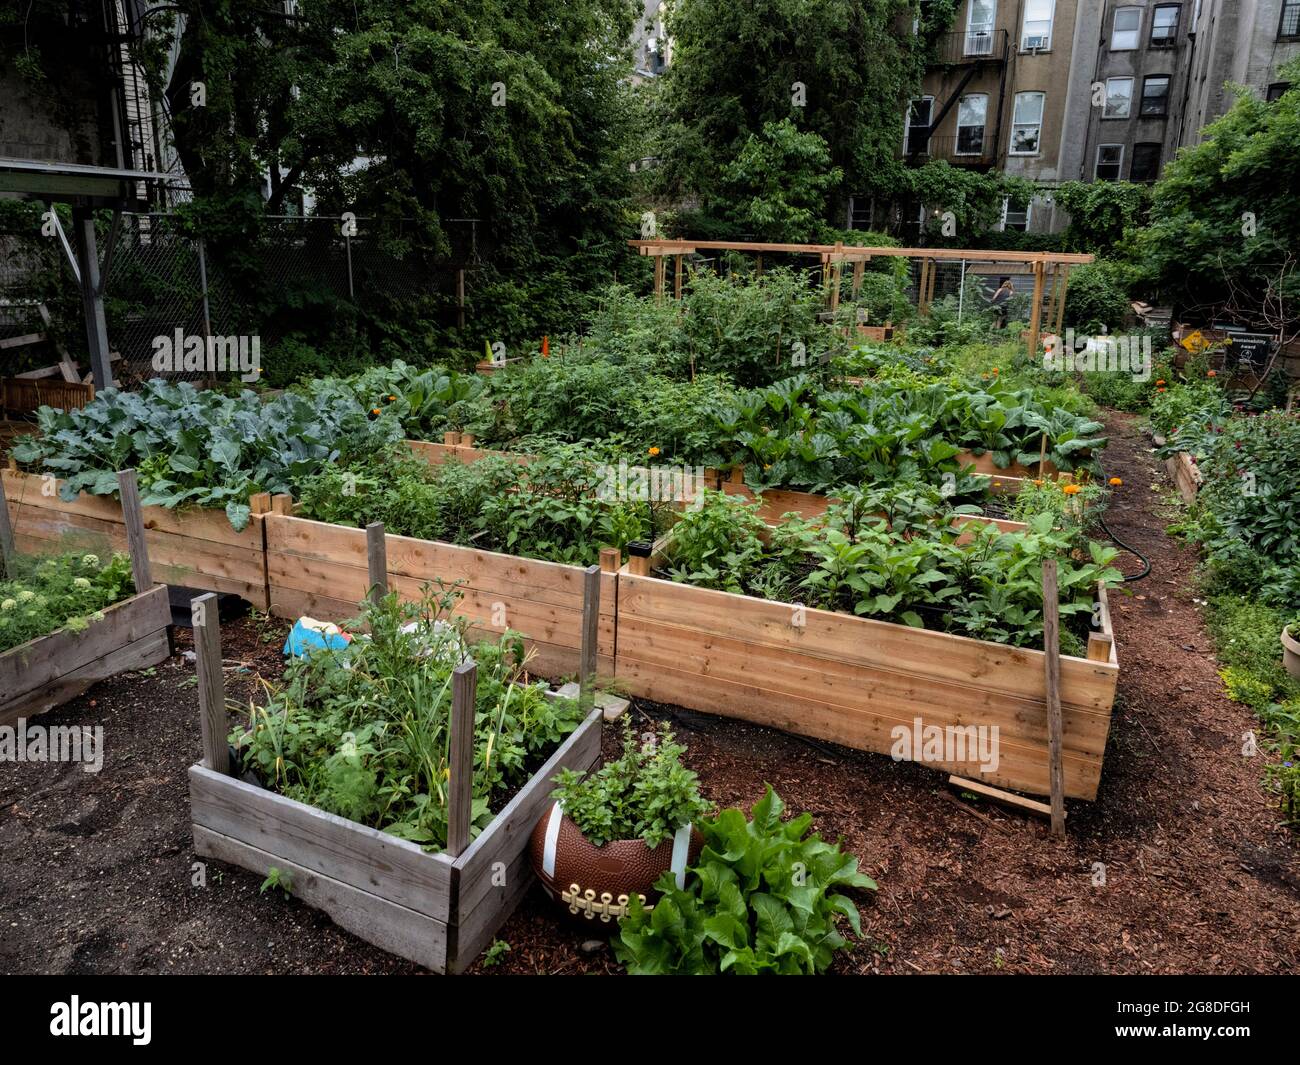 North America - United States, New York City: The Halsey Community Garden located in Brooklyn. Stock Photo